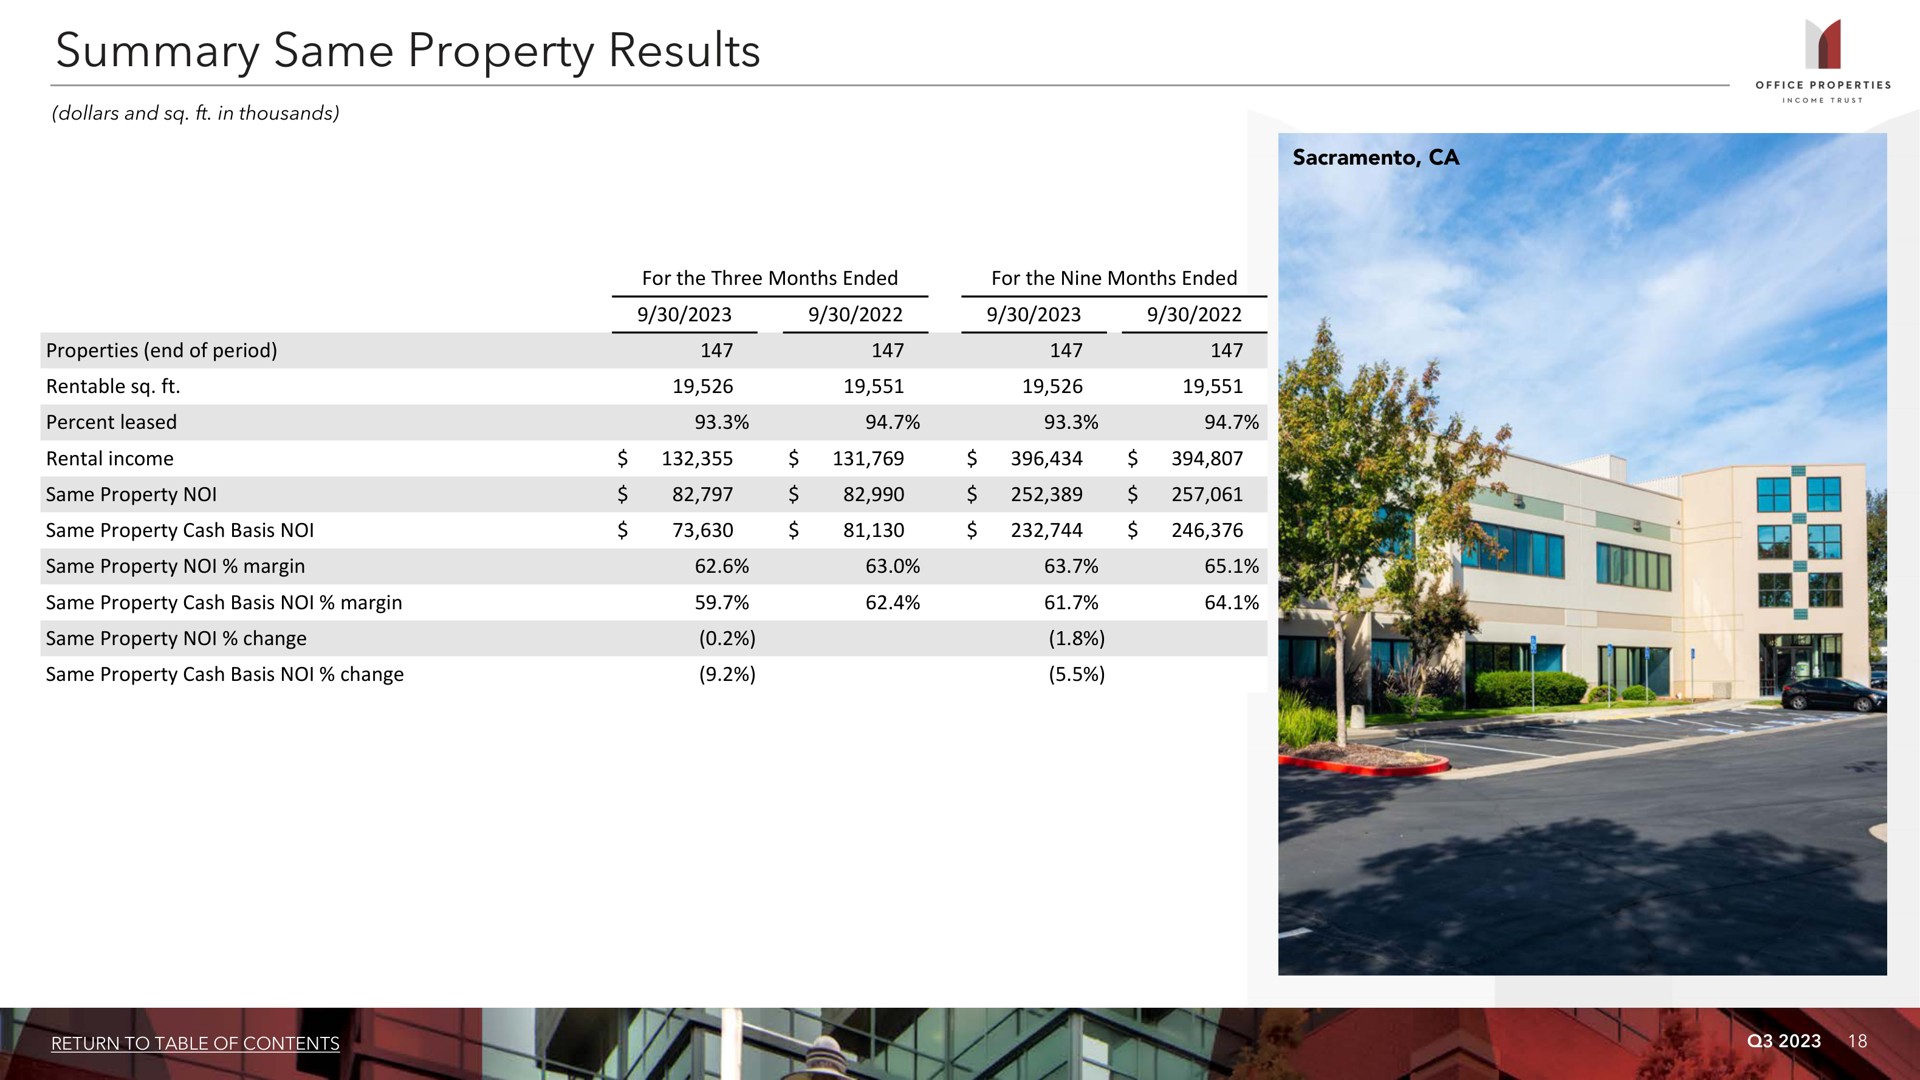 summary same property results i | Office Properties Income Trust